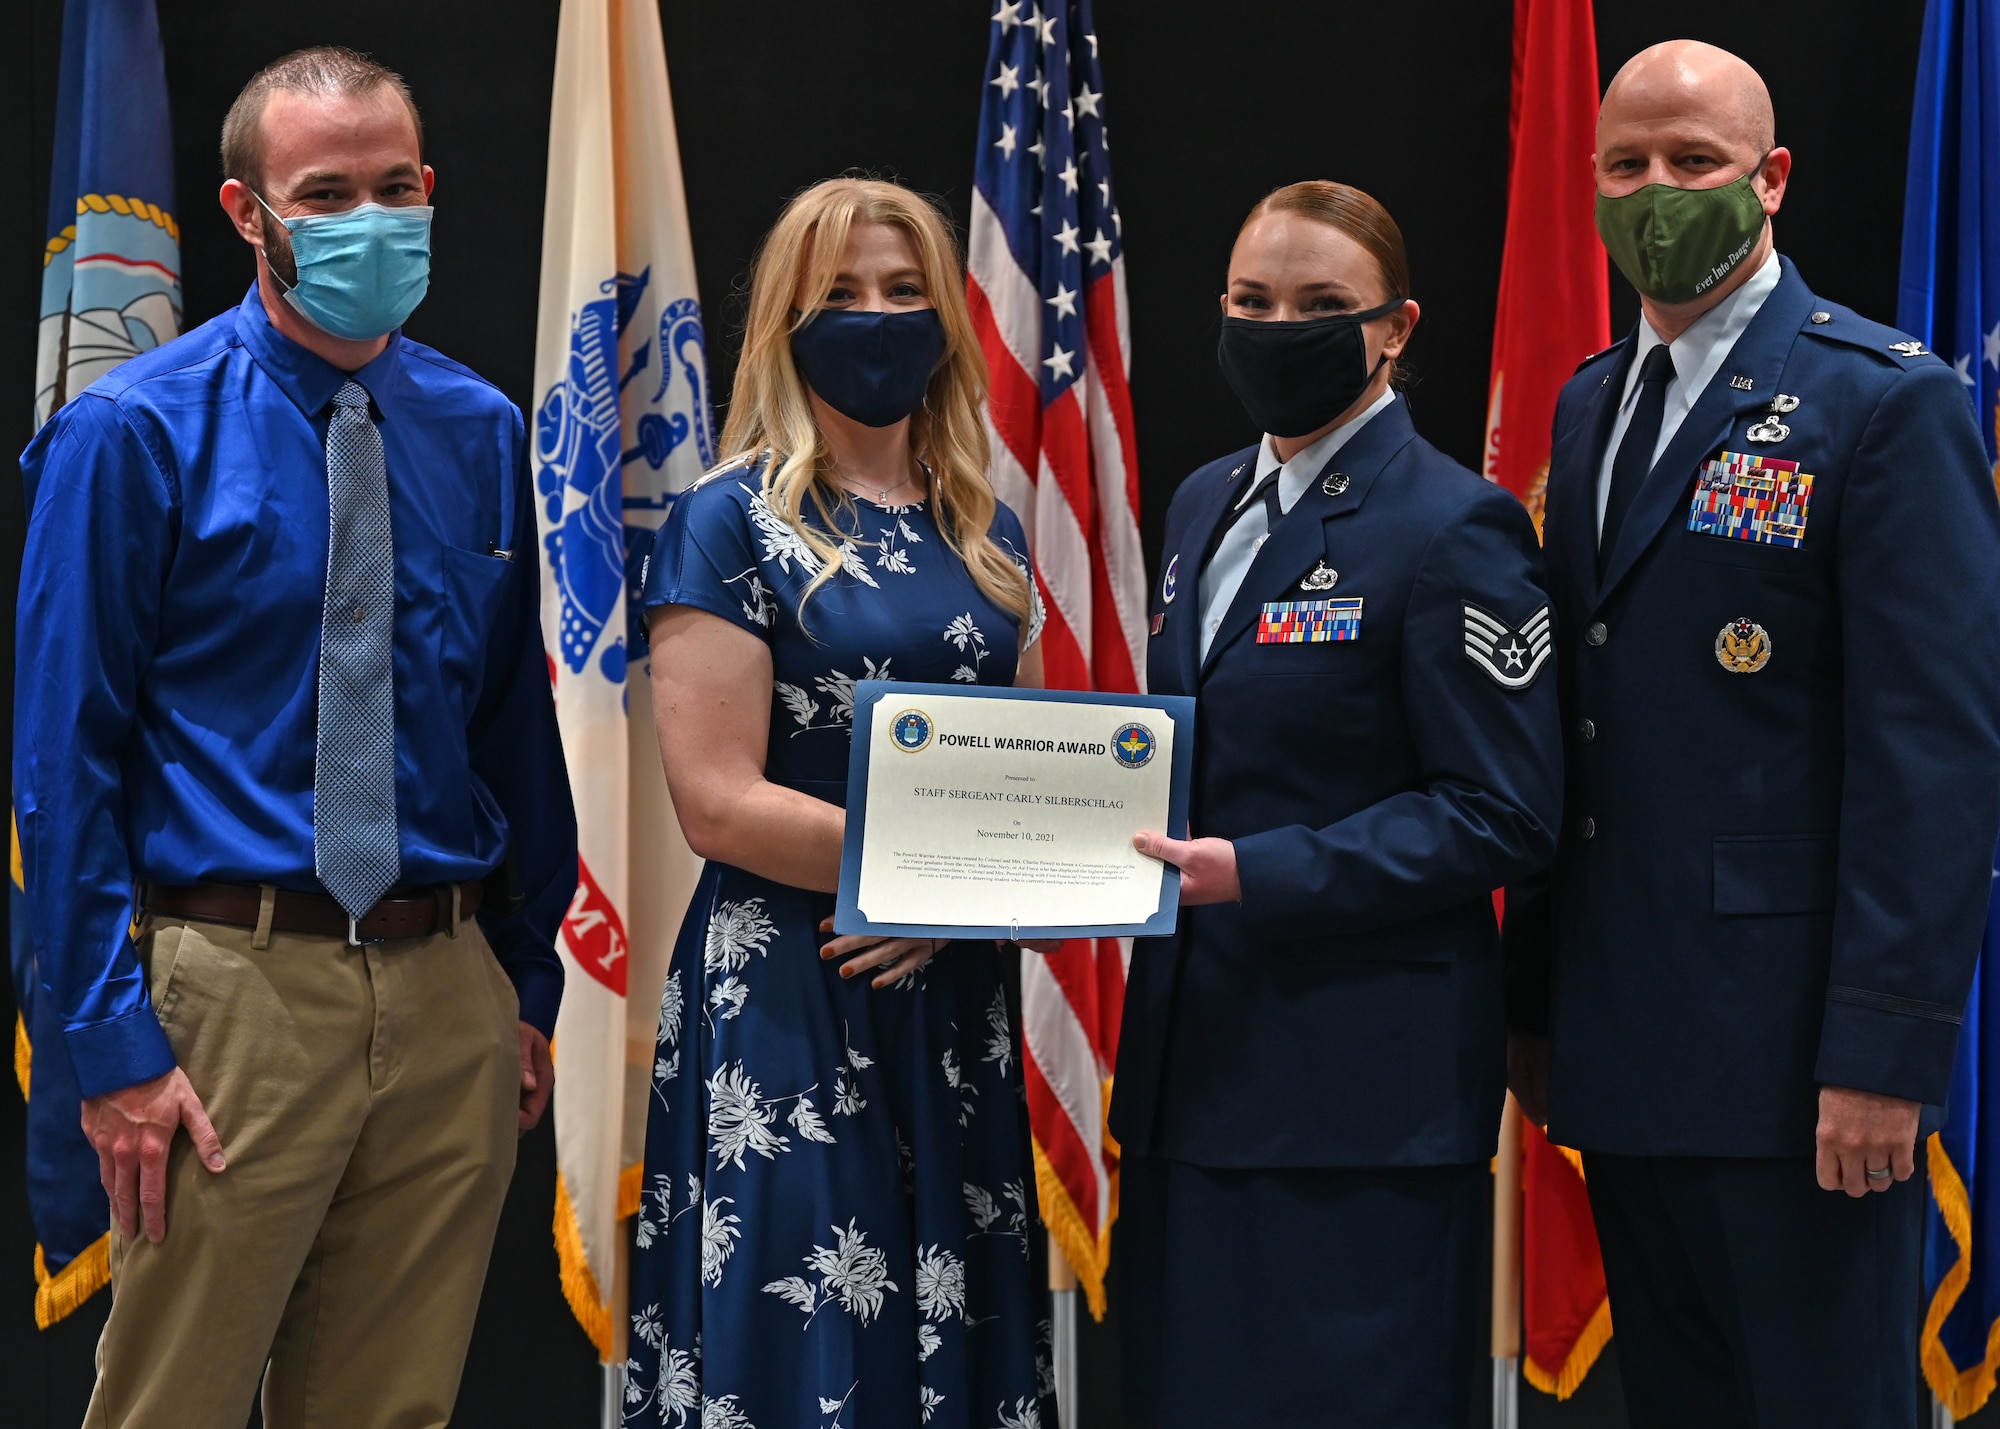 The granddaughter of the late retired Col. Charles Powell, Caitlin Cannady, presented the Powell Warrior Award to U.S. Air Force Staff Sgt. Carly Silberschlag, 316th Training Squadron instructor, at the Community College of the Air Force graduation in the Powell Event Center, Nov. 10, 2021. The award is presented only to CCAF graduates who display the highest degree of military excellence. (U.S. Air Force photo by Senior Airman Ethan Sherwood)